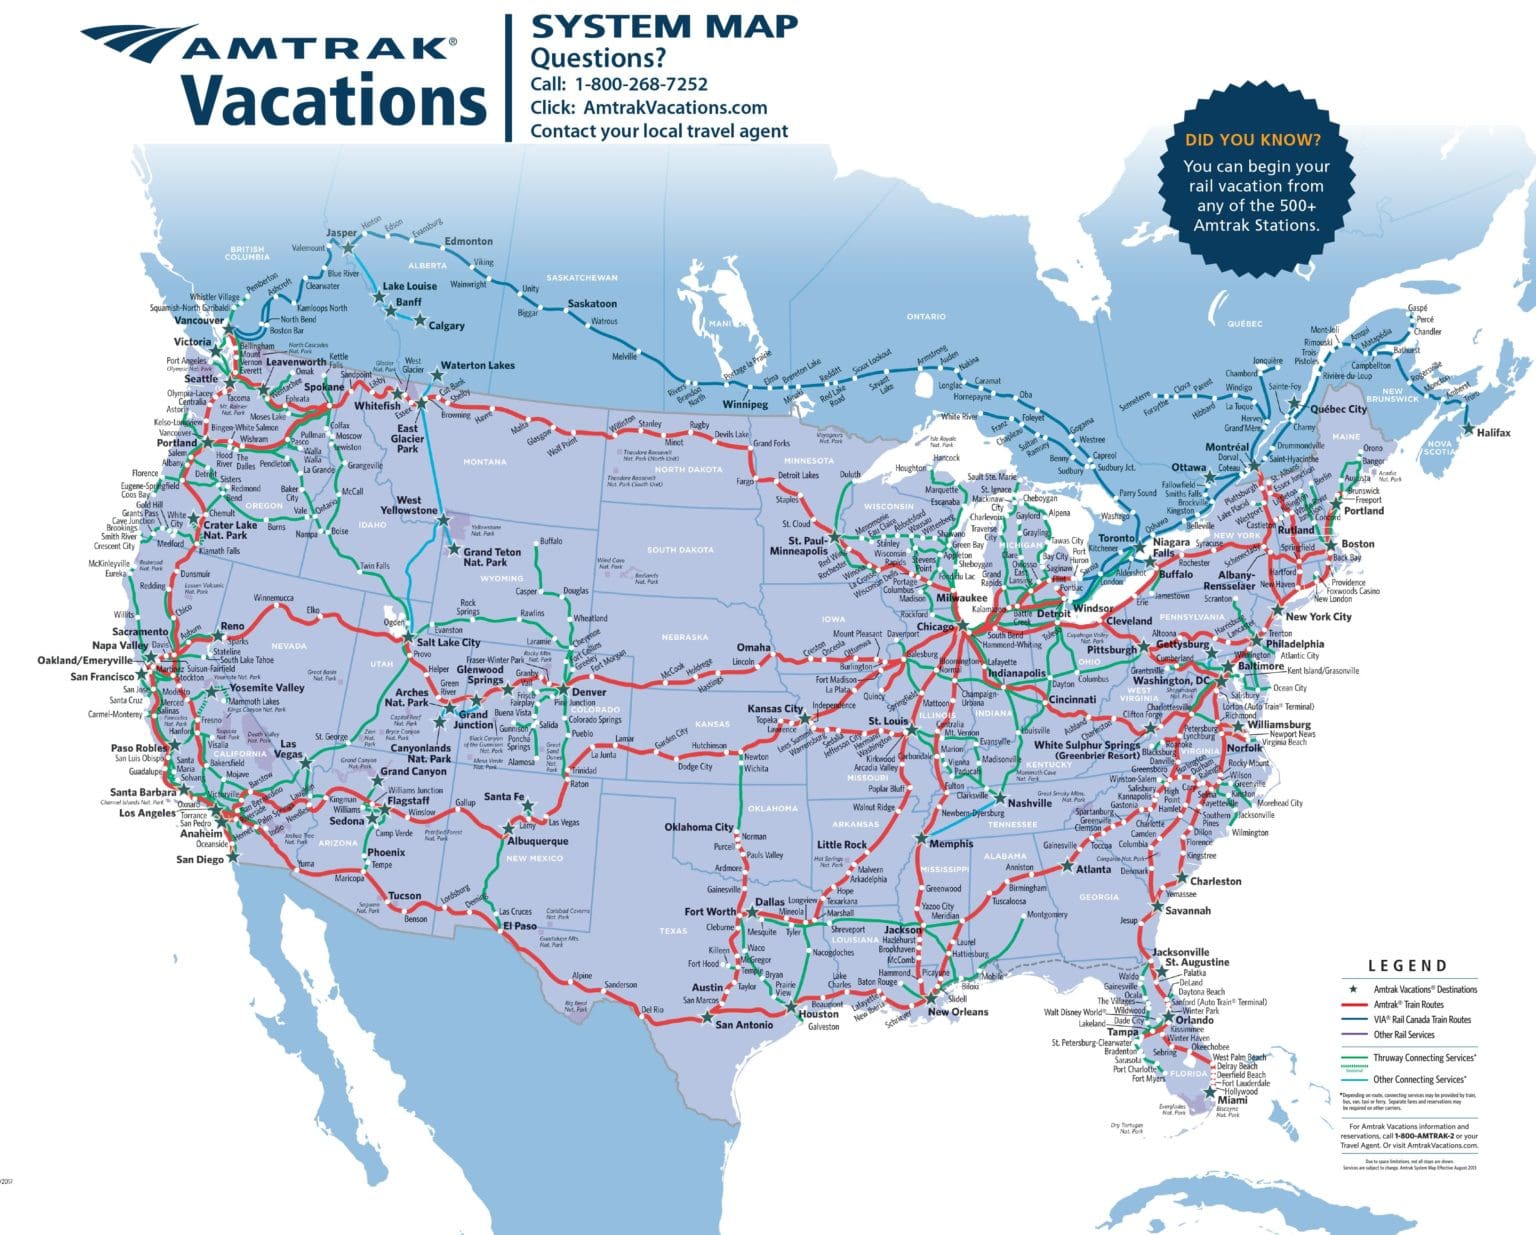 How to Relax and Enjoy the Ride with Amtrak Vacations Covington Travel